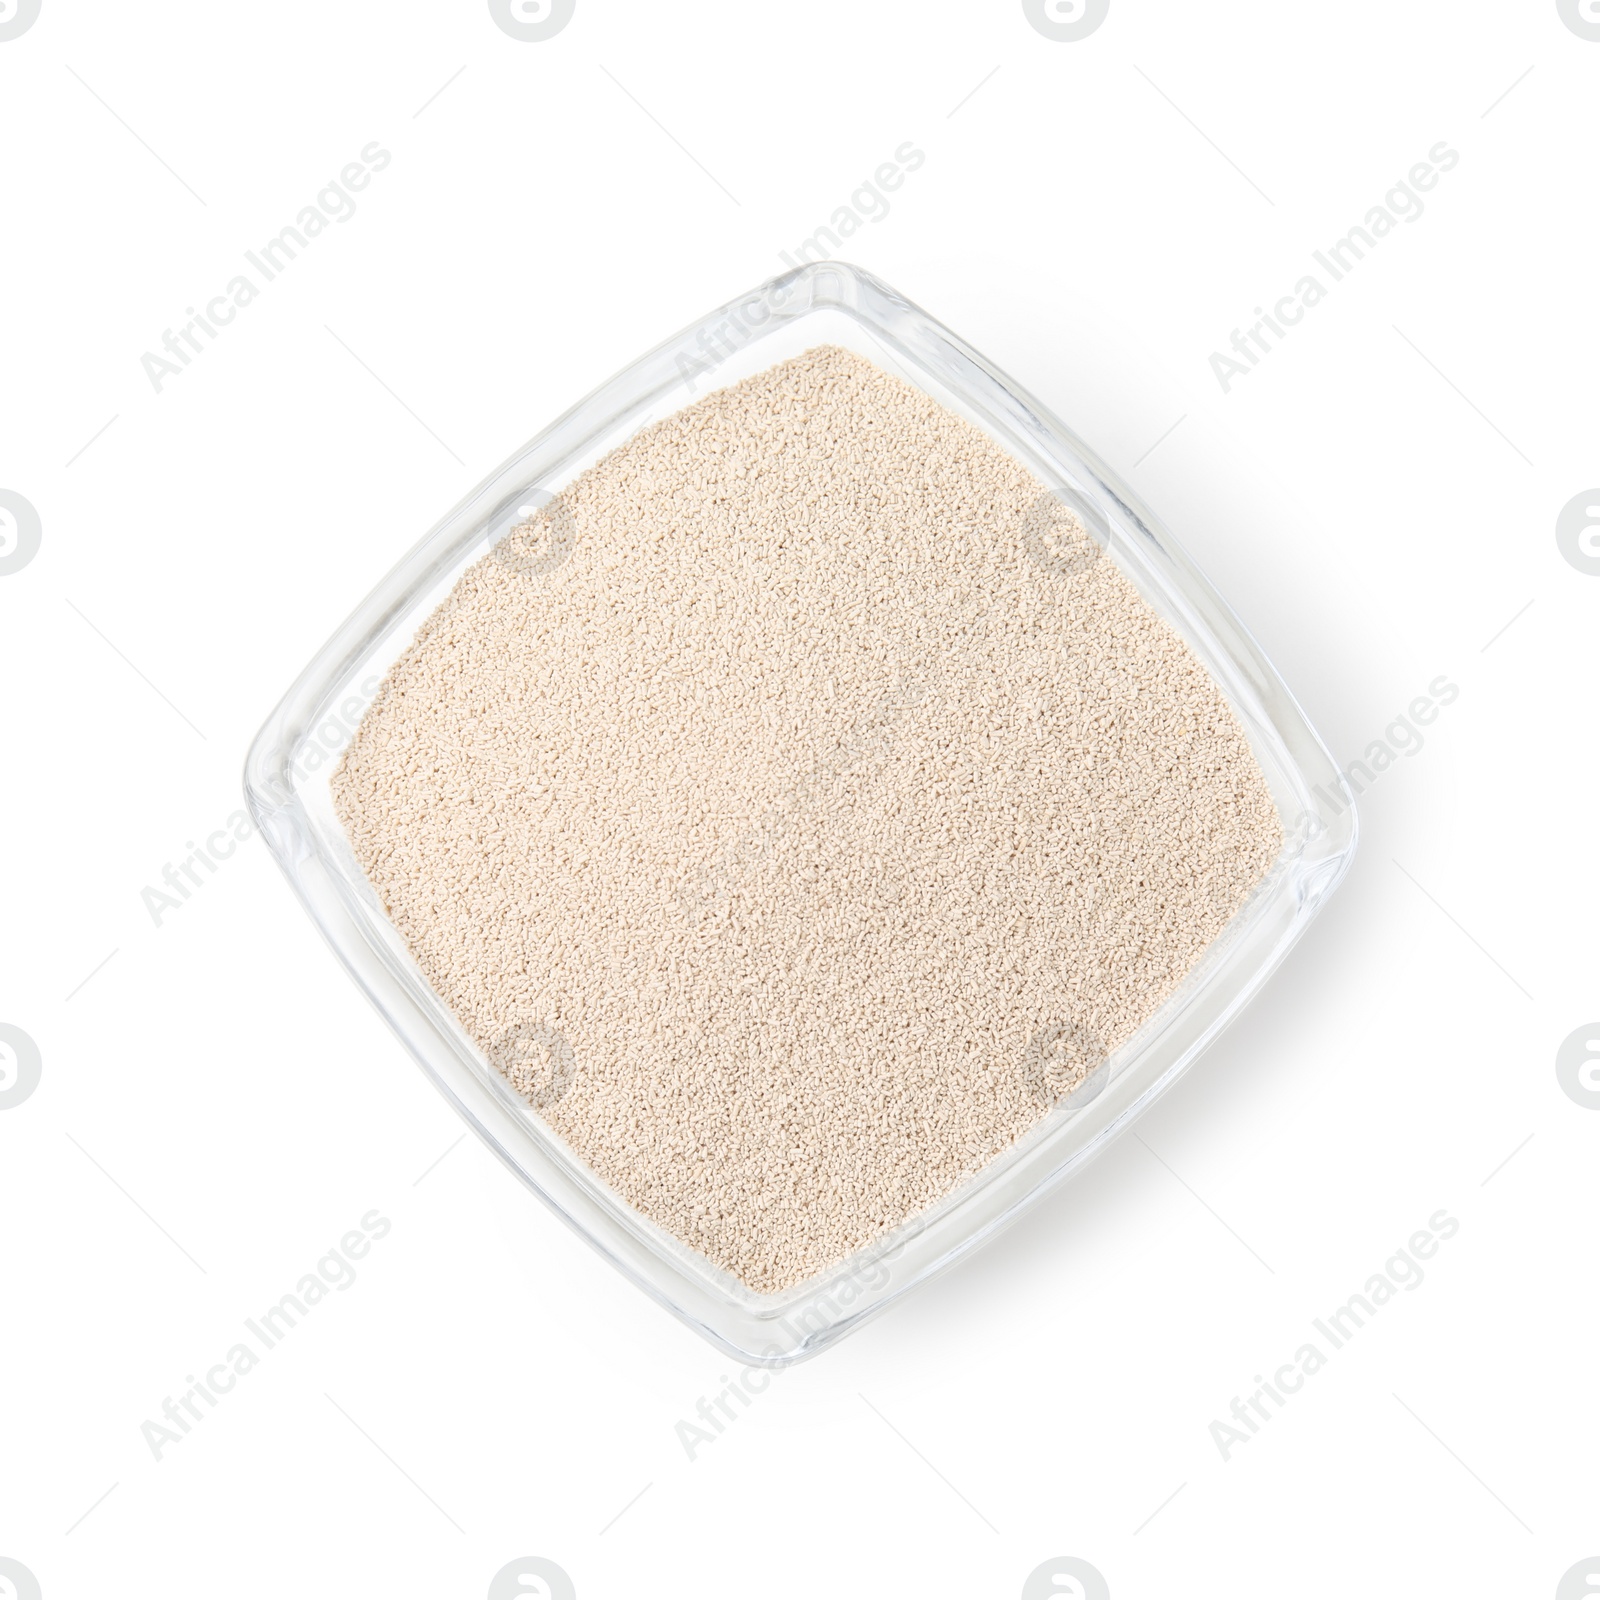 Photo of Granulated yeast in glass bowl isolated on white, top view